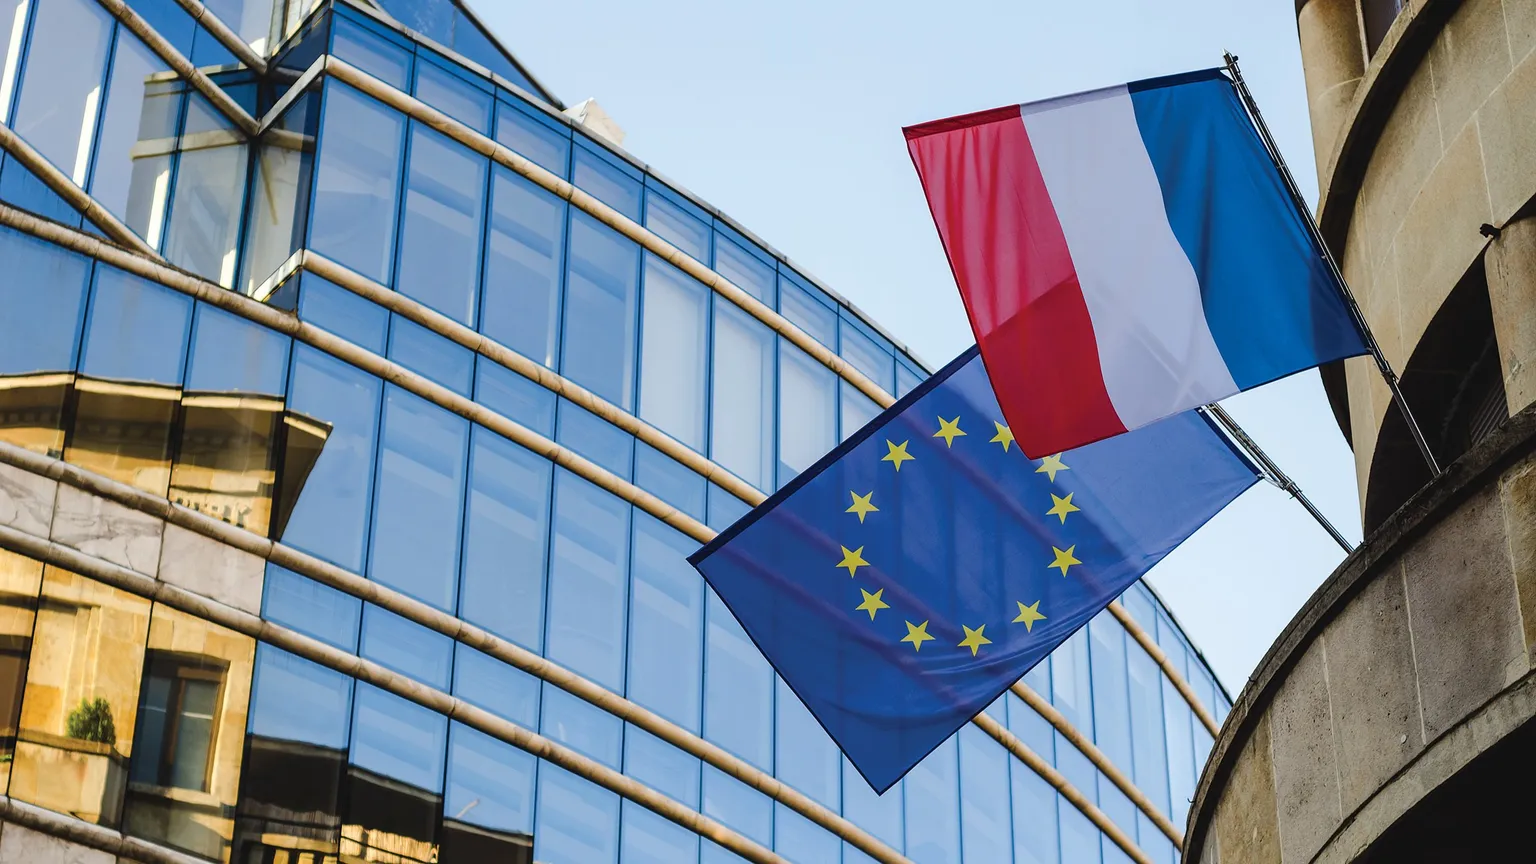 France and the EU. Image: Shutterstock